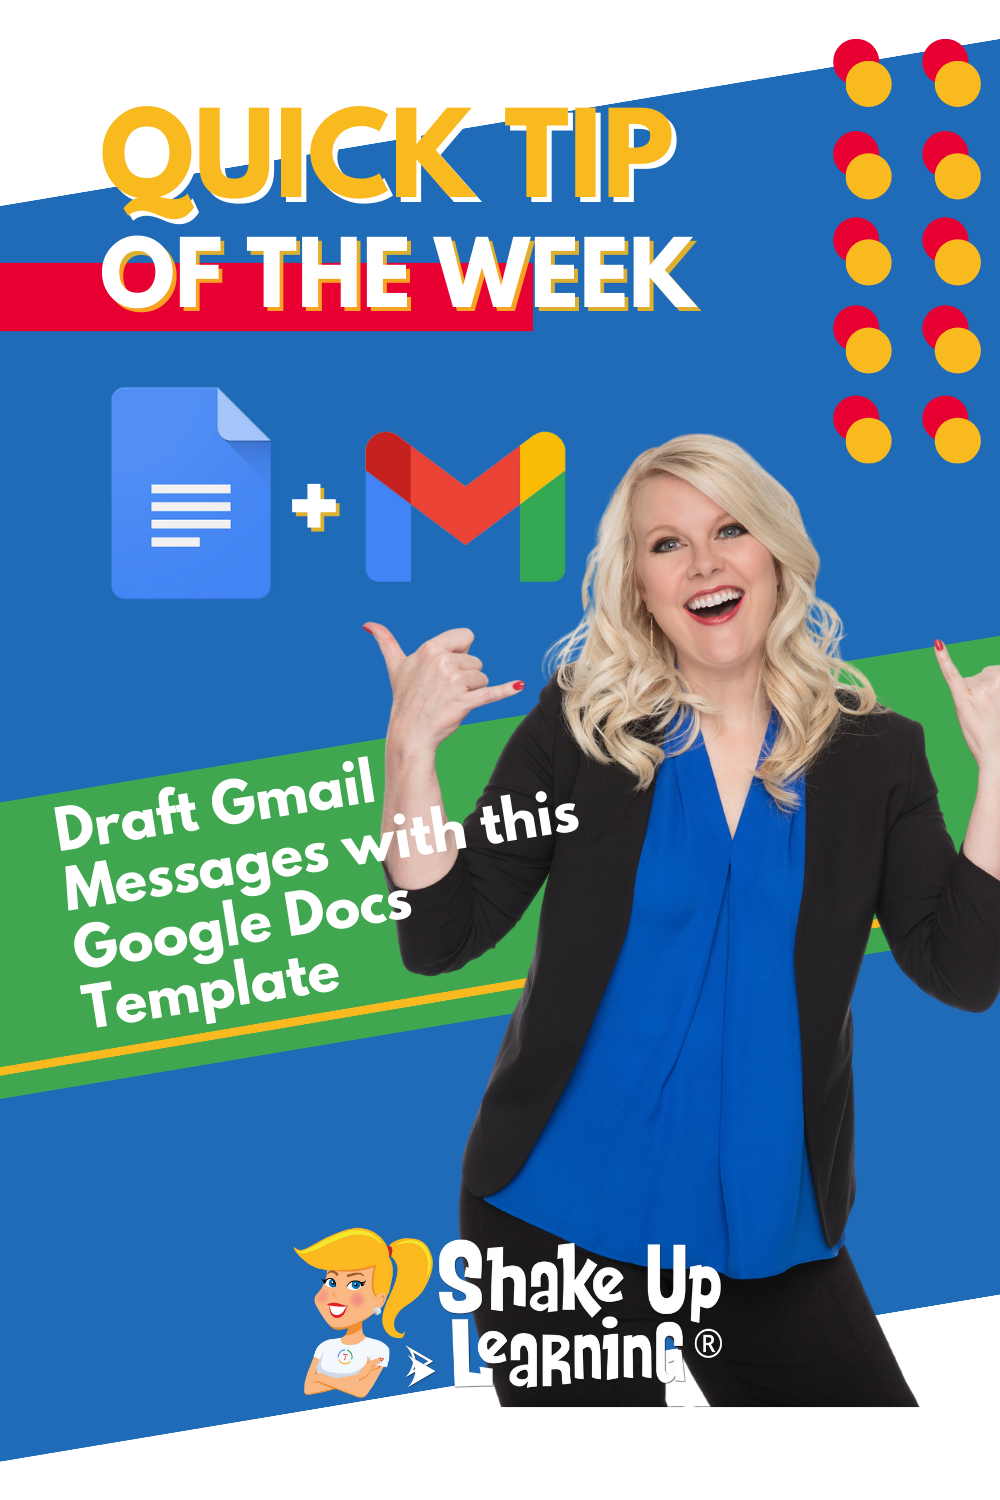 Draft Gmail Messages with this Google Docs Template